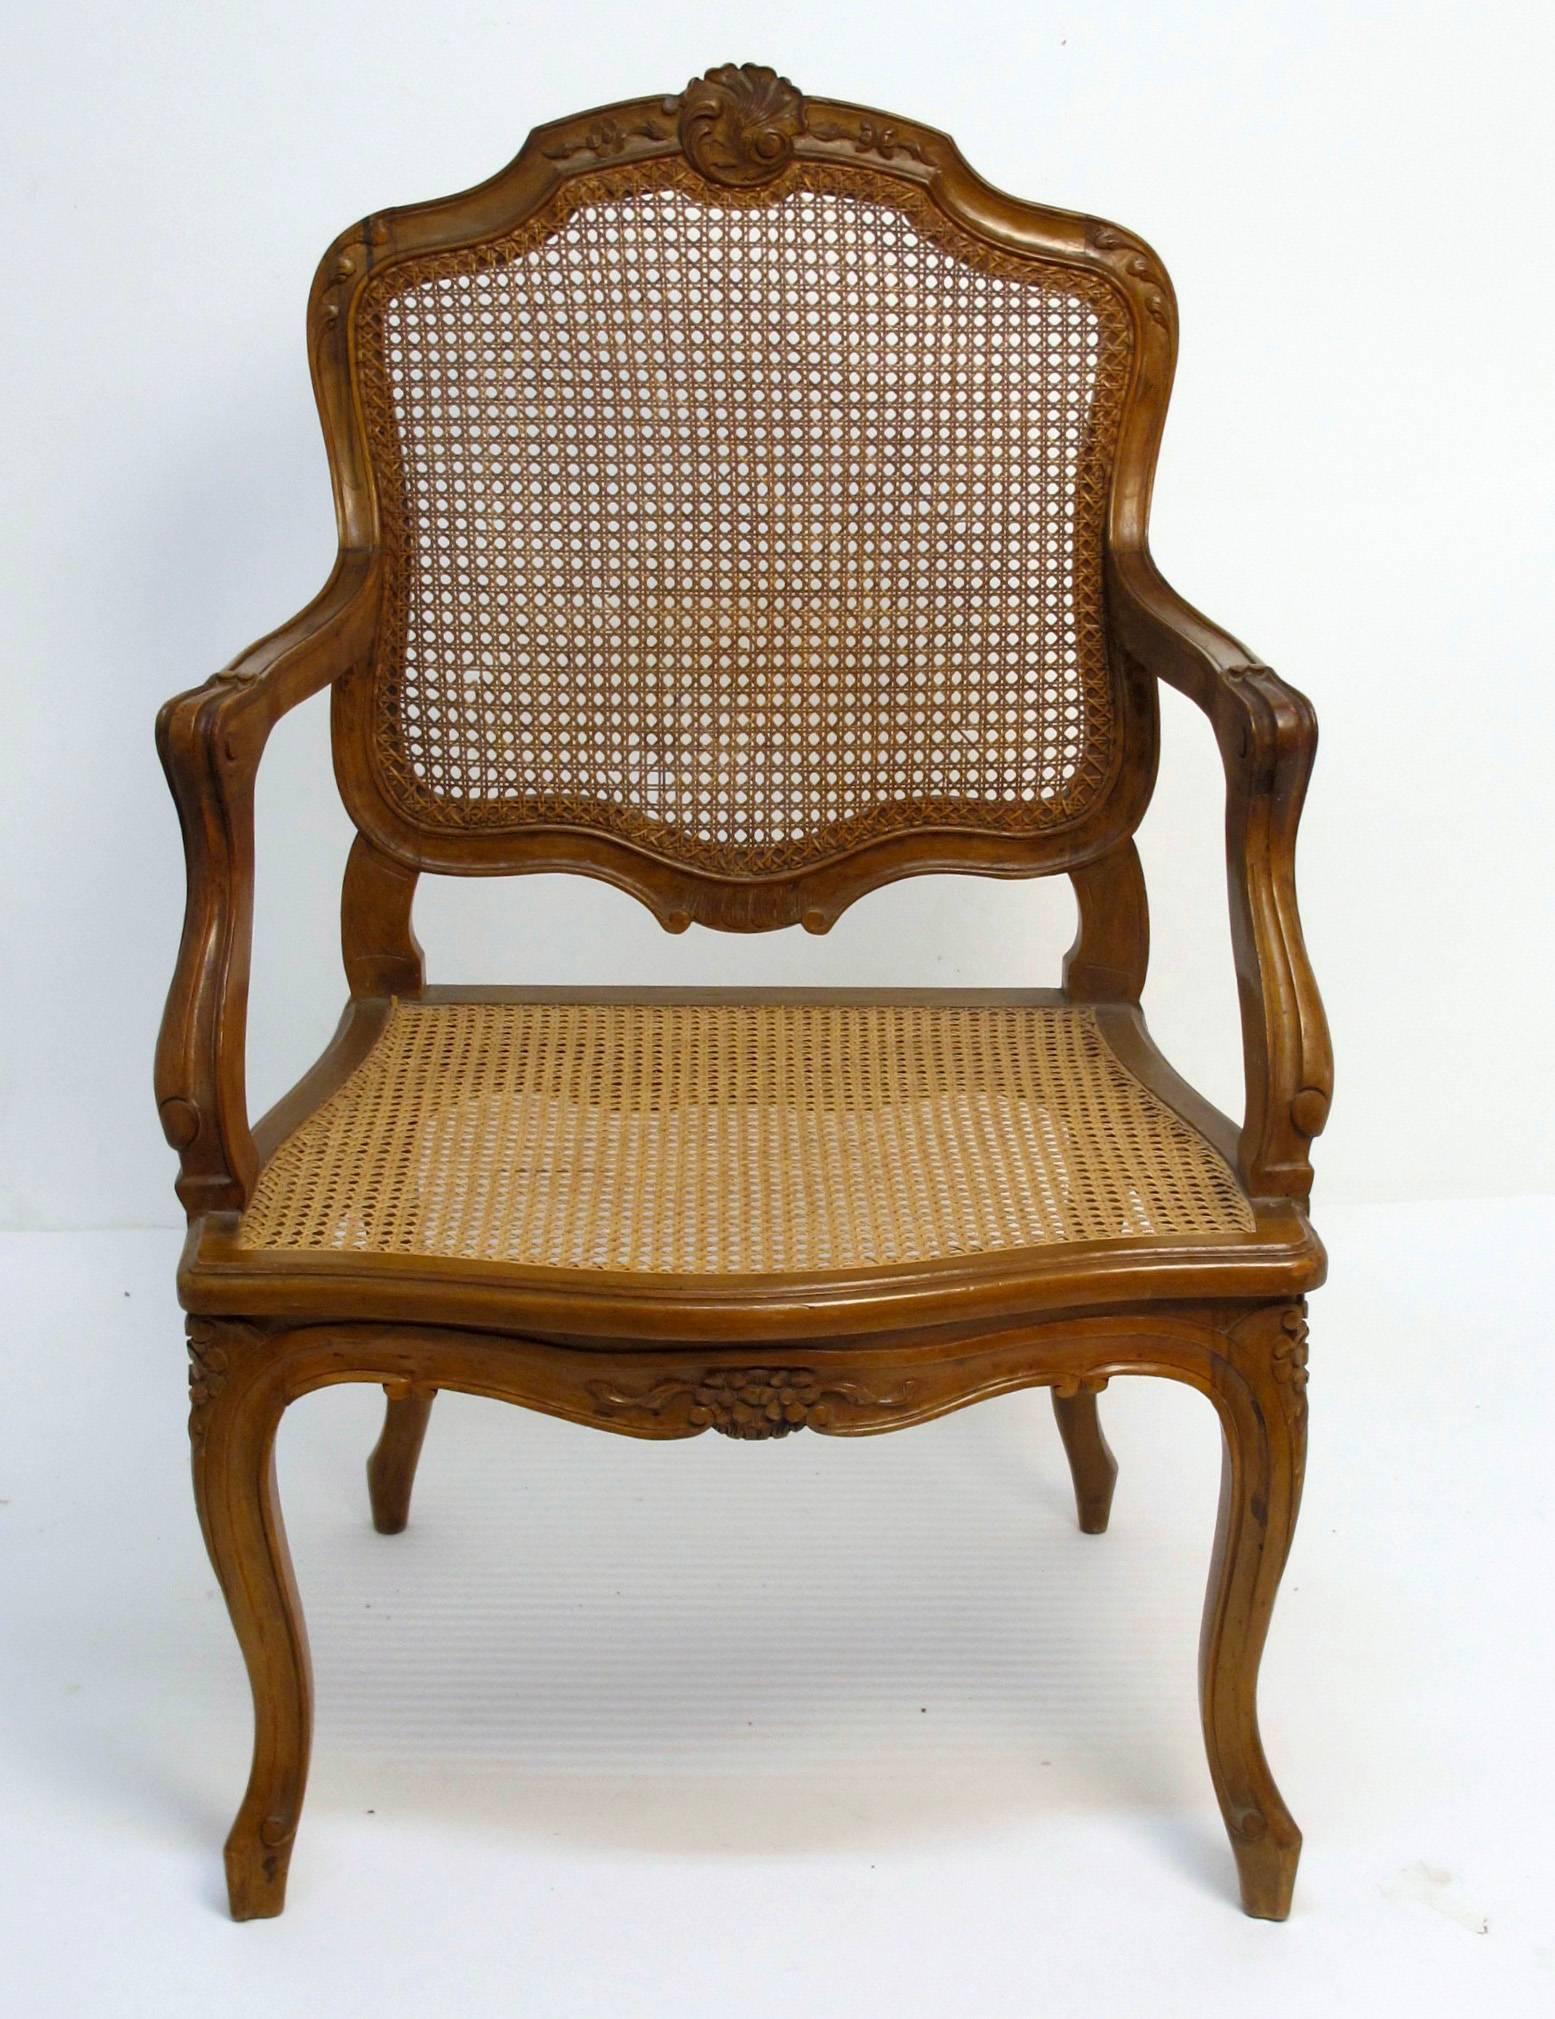 An 18th century Louis XV style armchair, elegantly carved beech wood with caned seat and back. France, early 20th century.